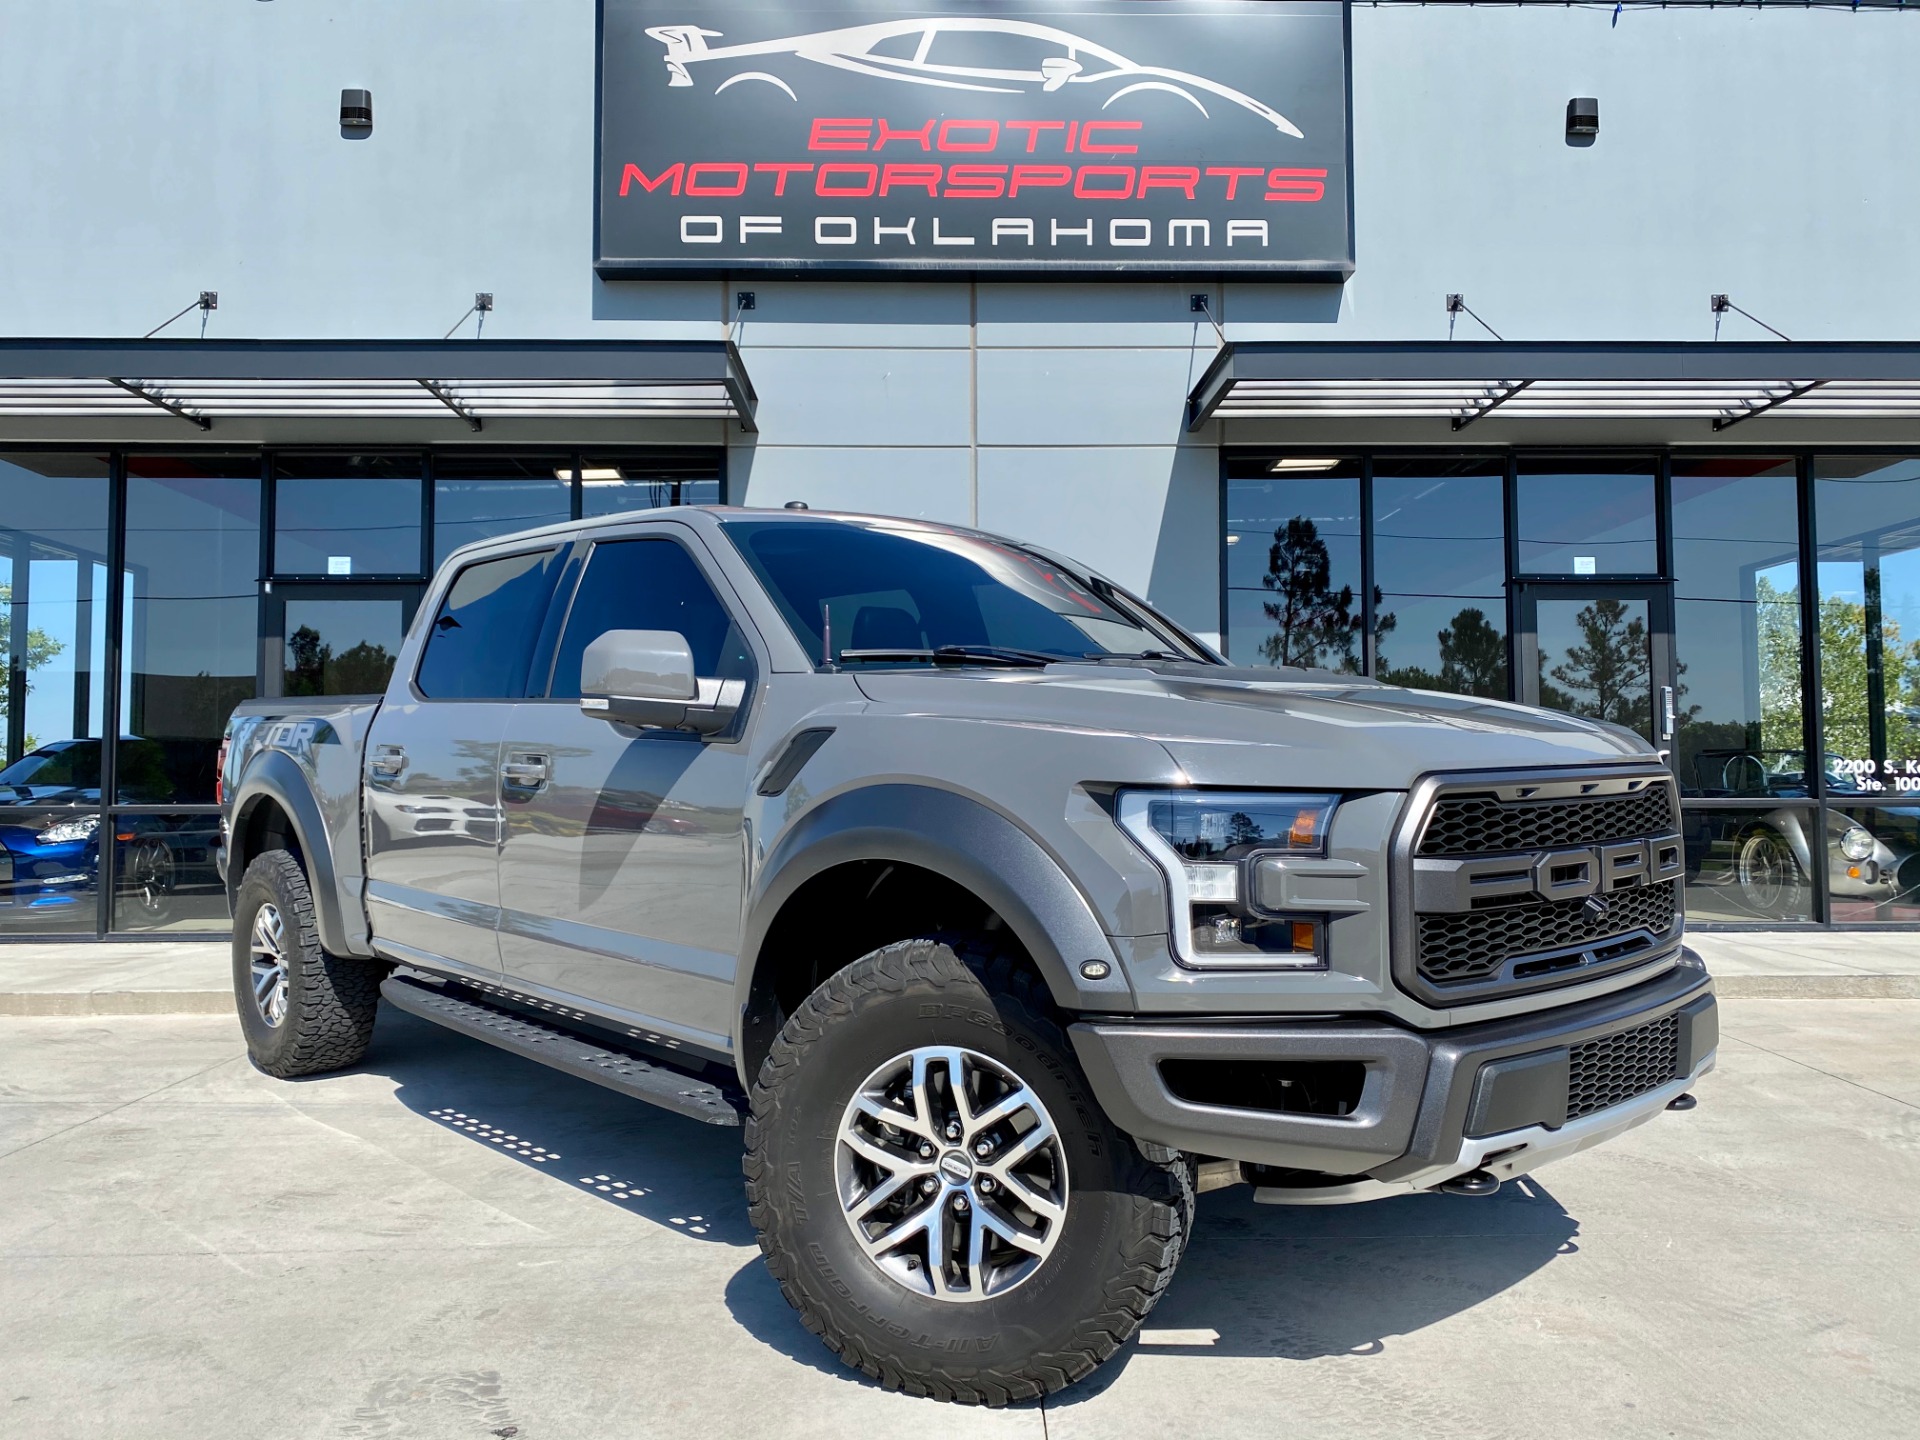 Used 2018 Ford F-150 Raptor For Sale (Sold) | Exotic Motorsports of ...